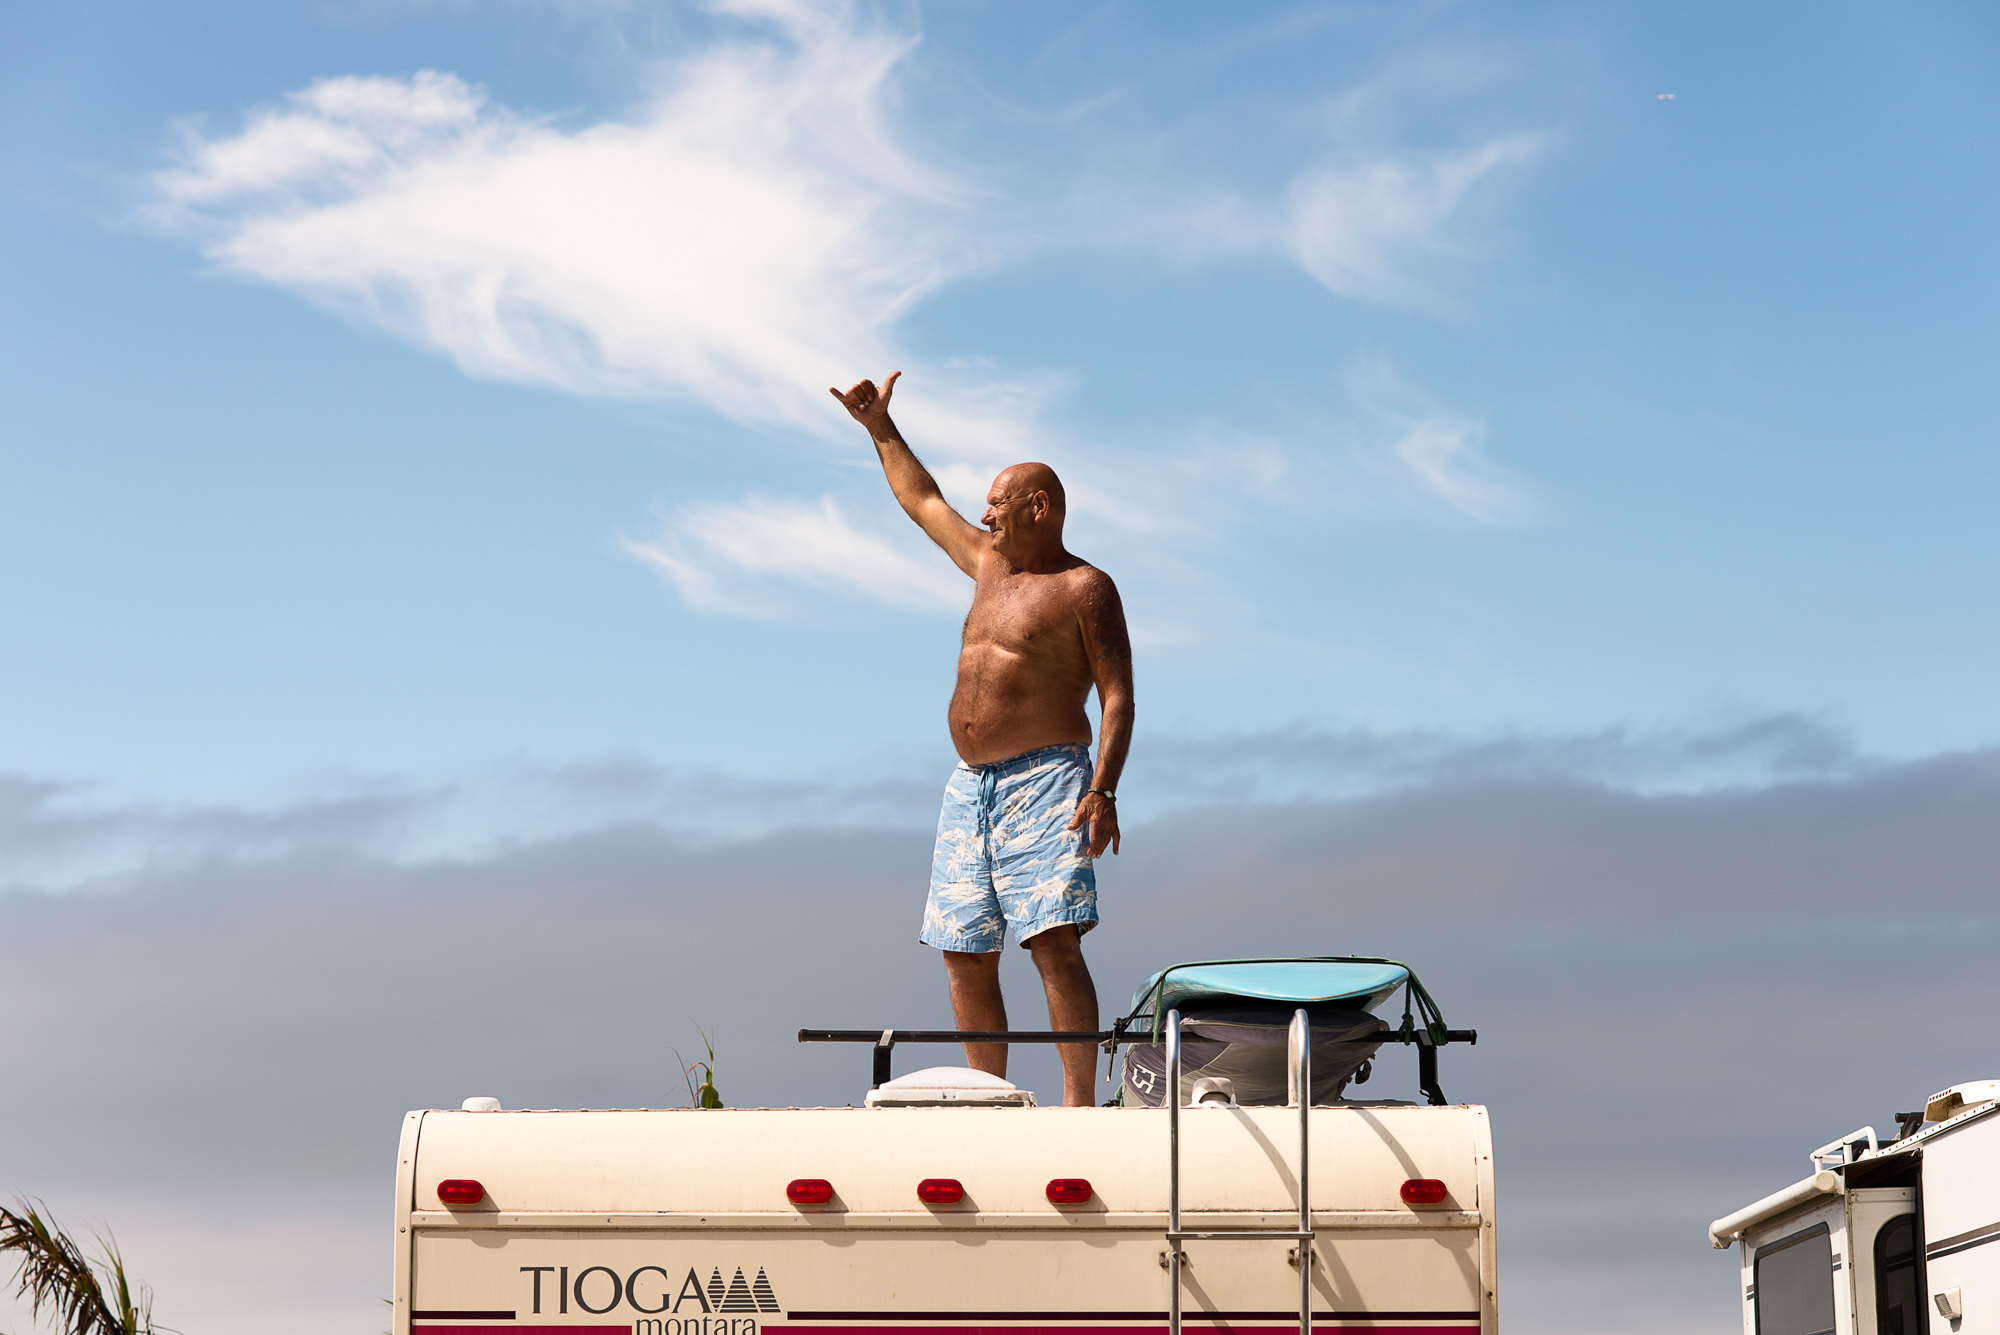 An older surfer signals hang loose atop his RV Camper in San Onofre, San Clemente, Calif.